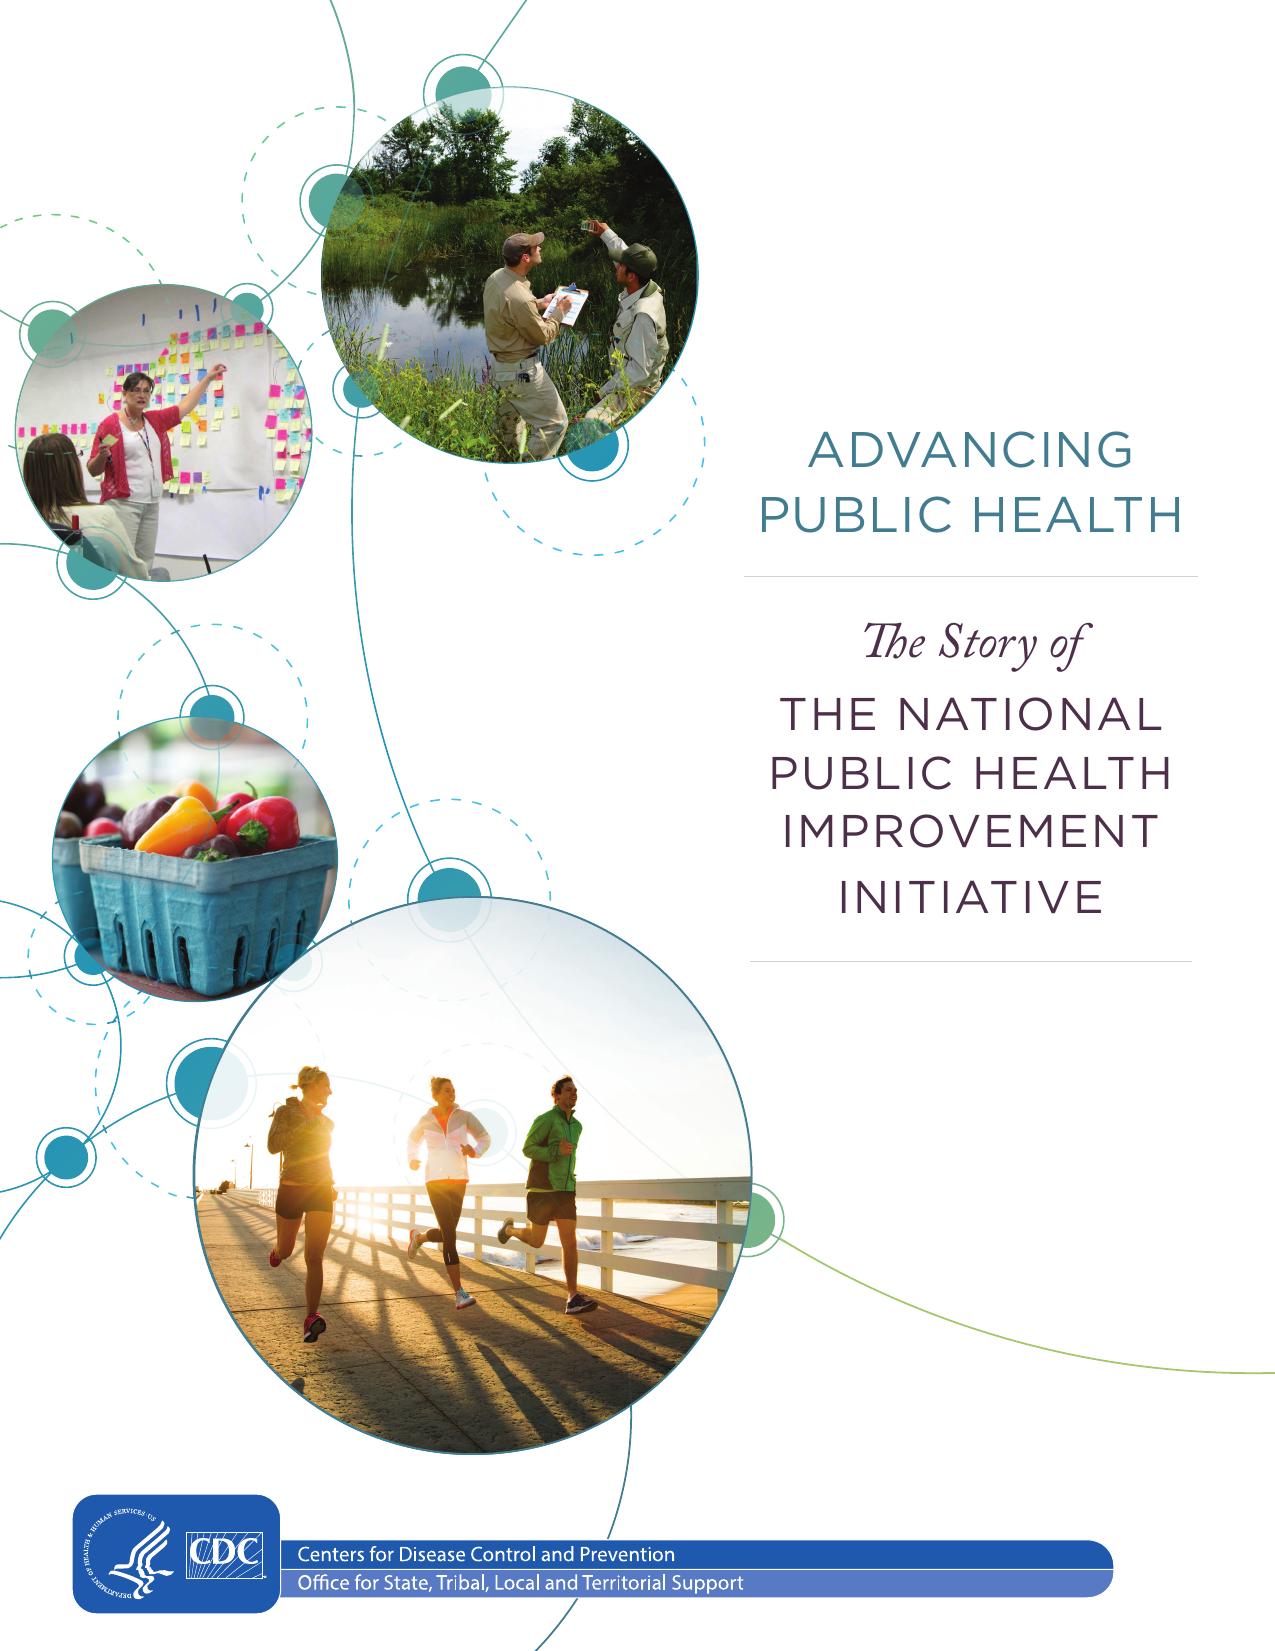 Advancing Public Health: The Story of the National Public Health Improvement Initiative